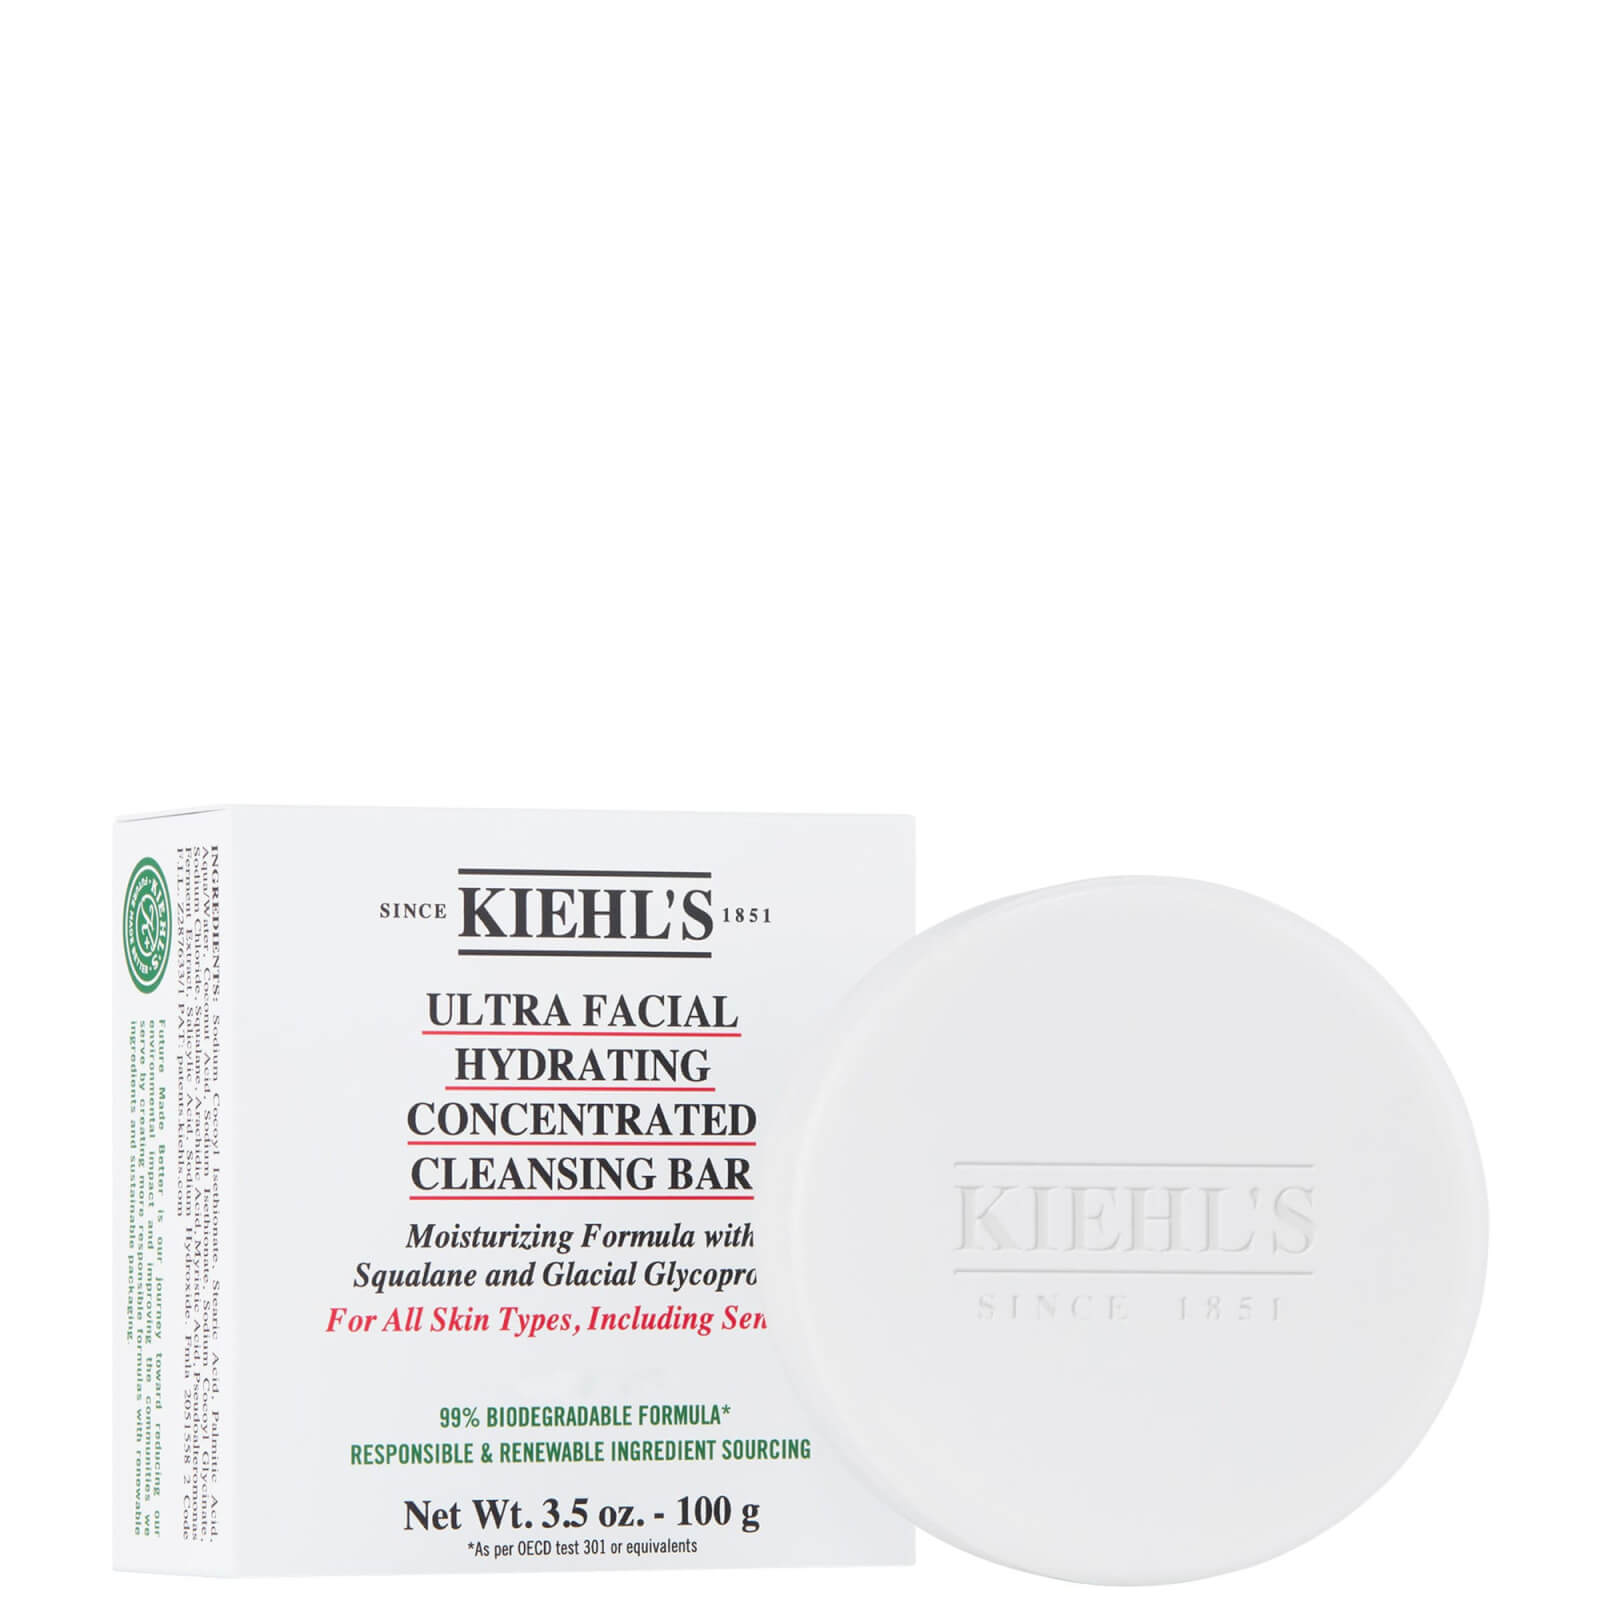 Photos - Facial / Body Cleansing Product Kiehls Kiehl's Ultra Facial Hydrating Concentrated Cleansing Bar 100g 